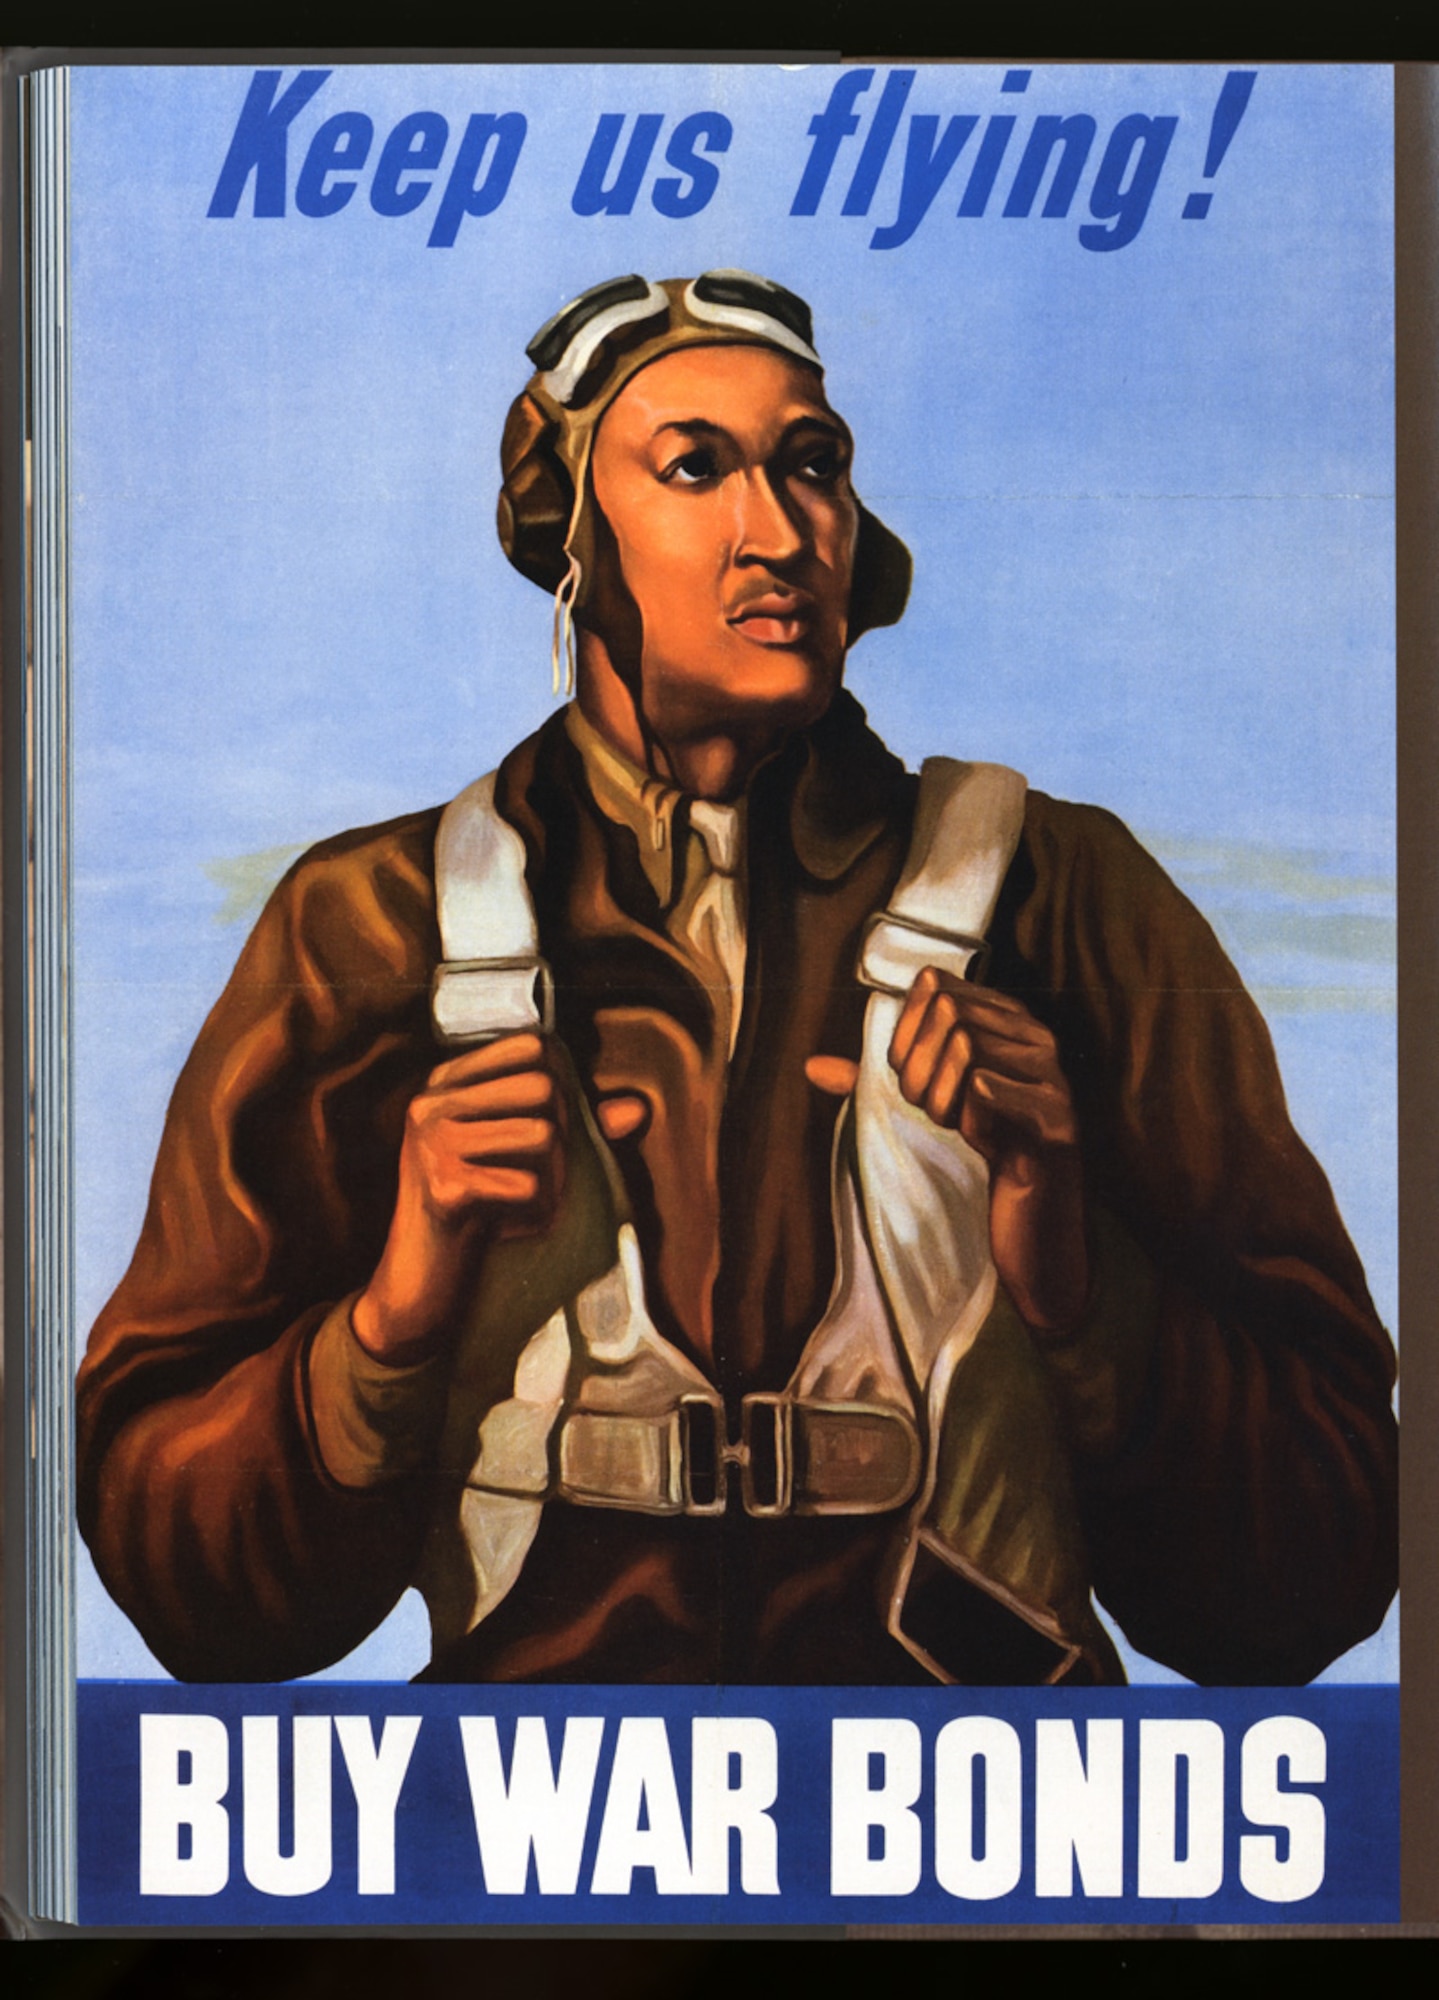 Tuskegee Airman William Diez is featured in this World War II plea for Americans to buy war bonds. The poster is one of a series of patriotic posters sponsored by the Office of War Information. (From the Smithsonian Institution, ID #258)